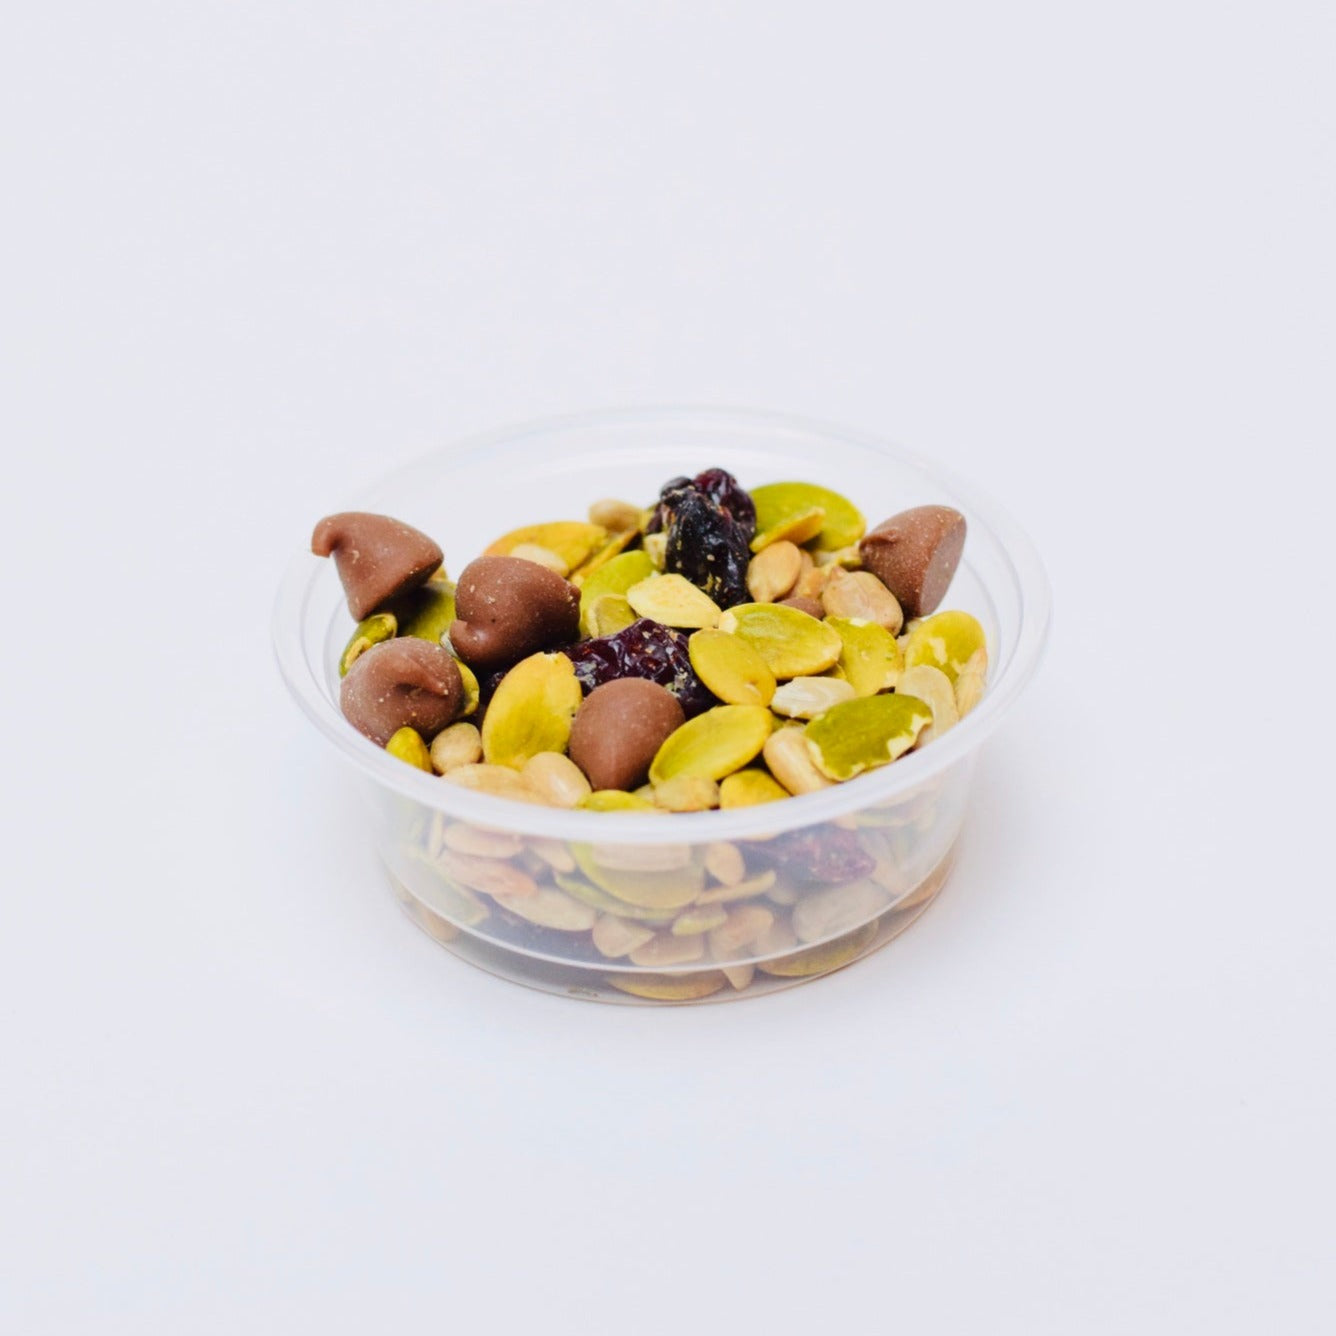 Mexi Combo - Taco Kit, Crazy Snack Mix, Trail Mix with Gzooh Spice and Chocolate Chips